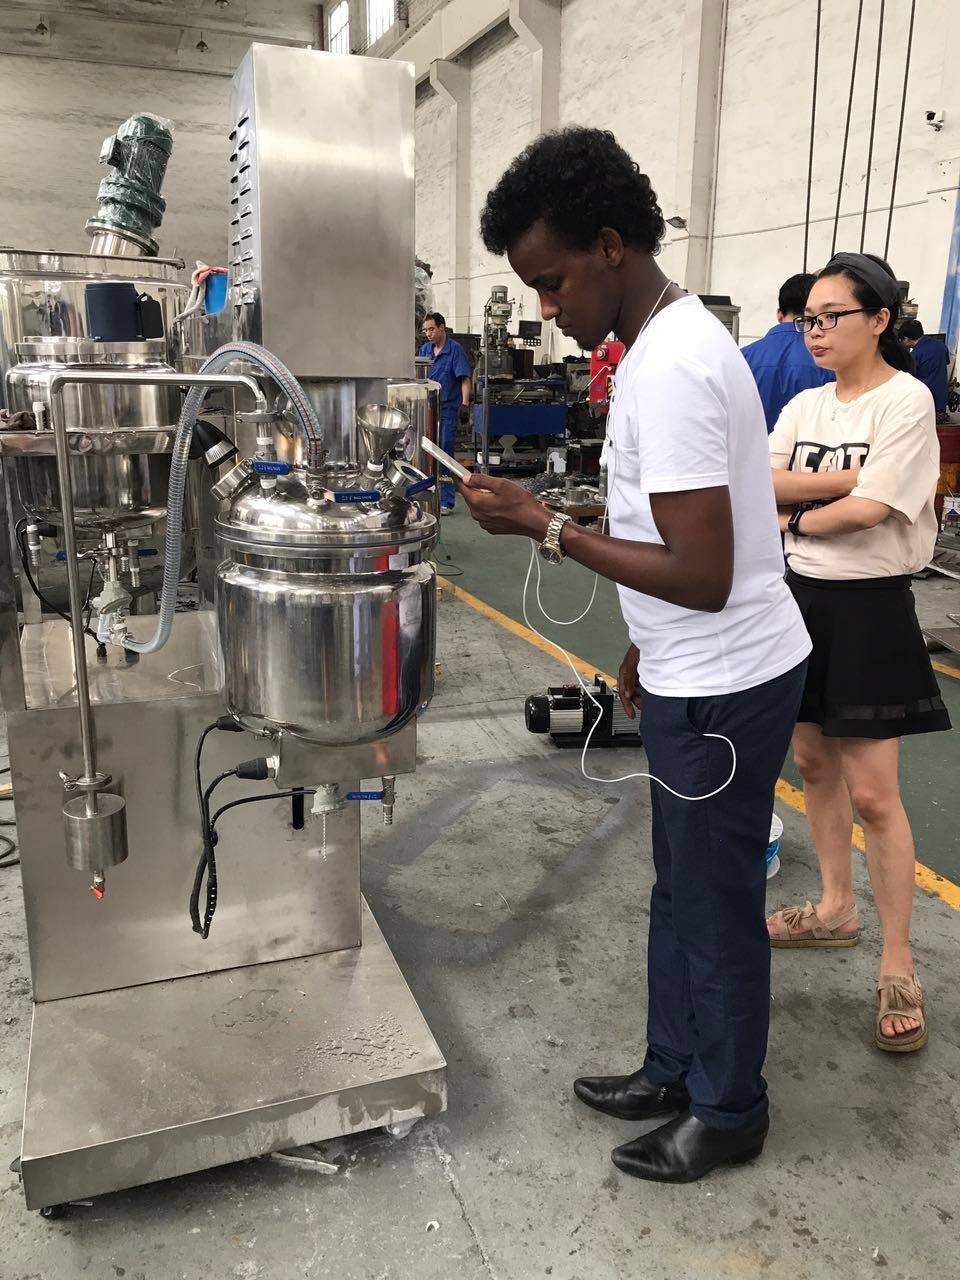 small lab research mixing mixer lab homogenizer emulsifying machine used cosmetic cream paste and lotion